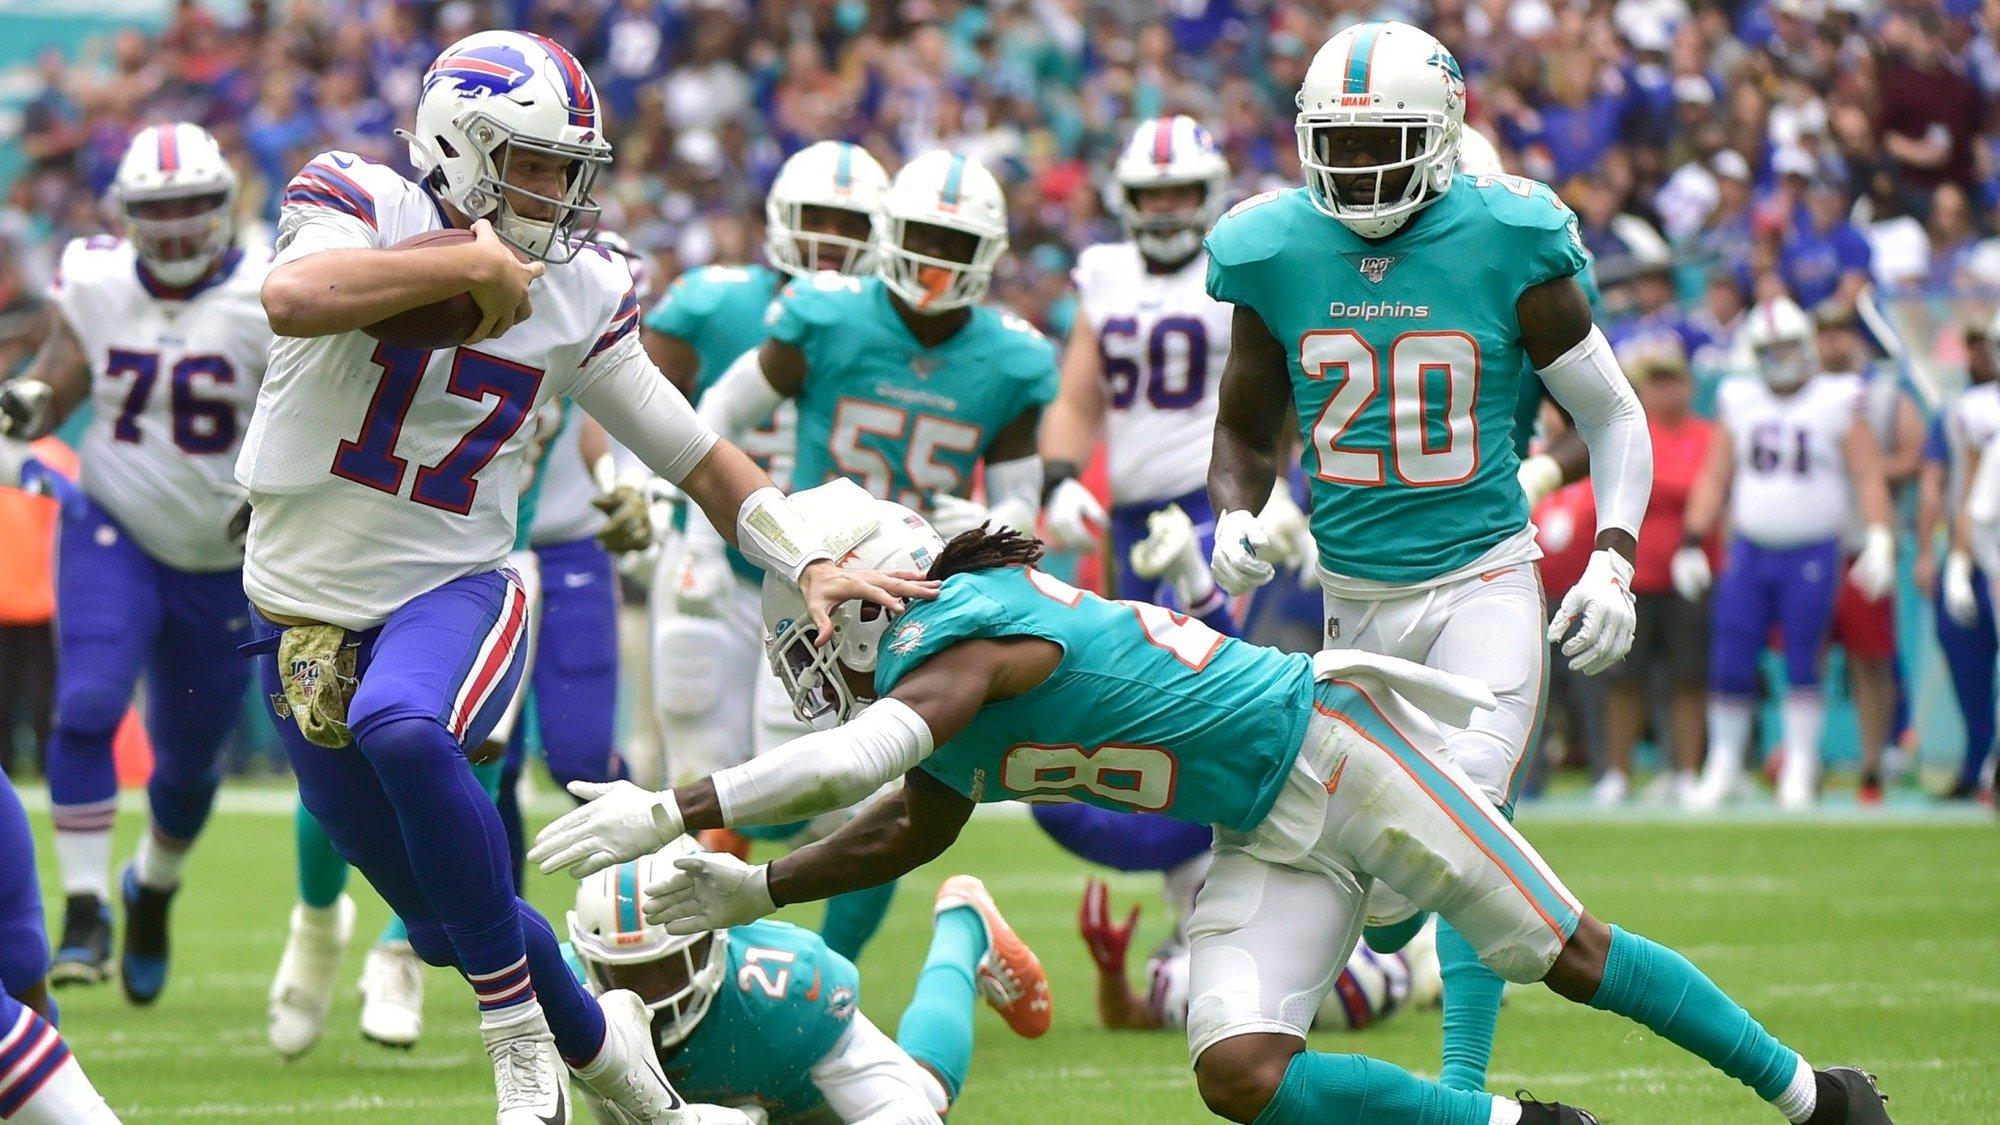 Buffalo Bills vs Miami Dolphins Betting Preview: Bills Look to Rebound and Assert Dominance in AFC East